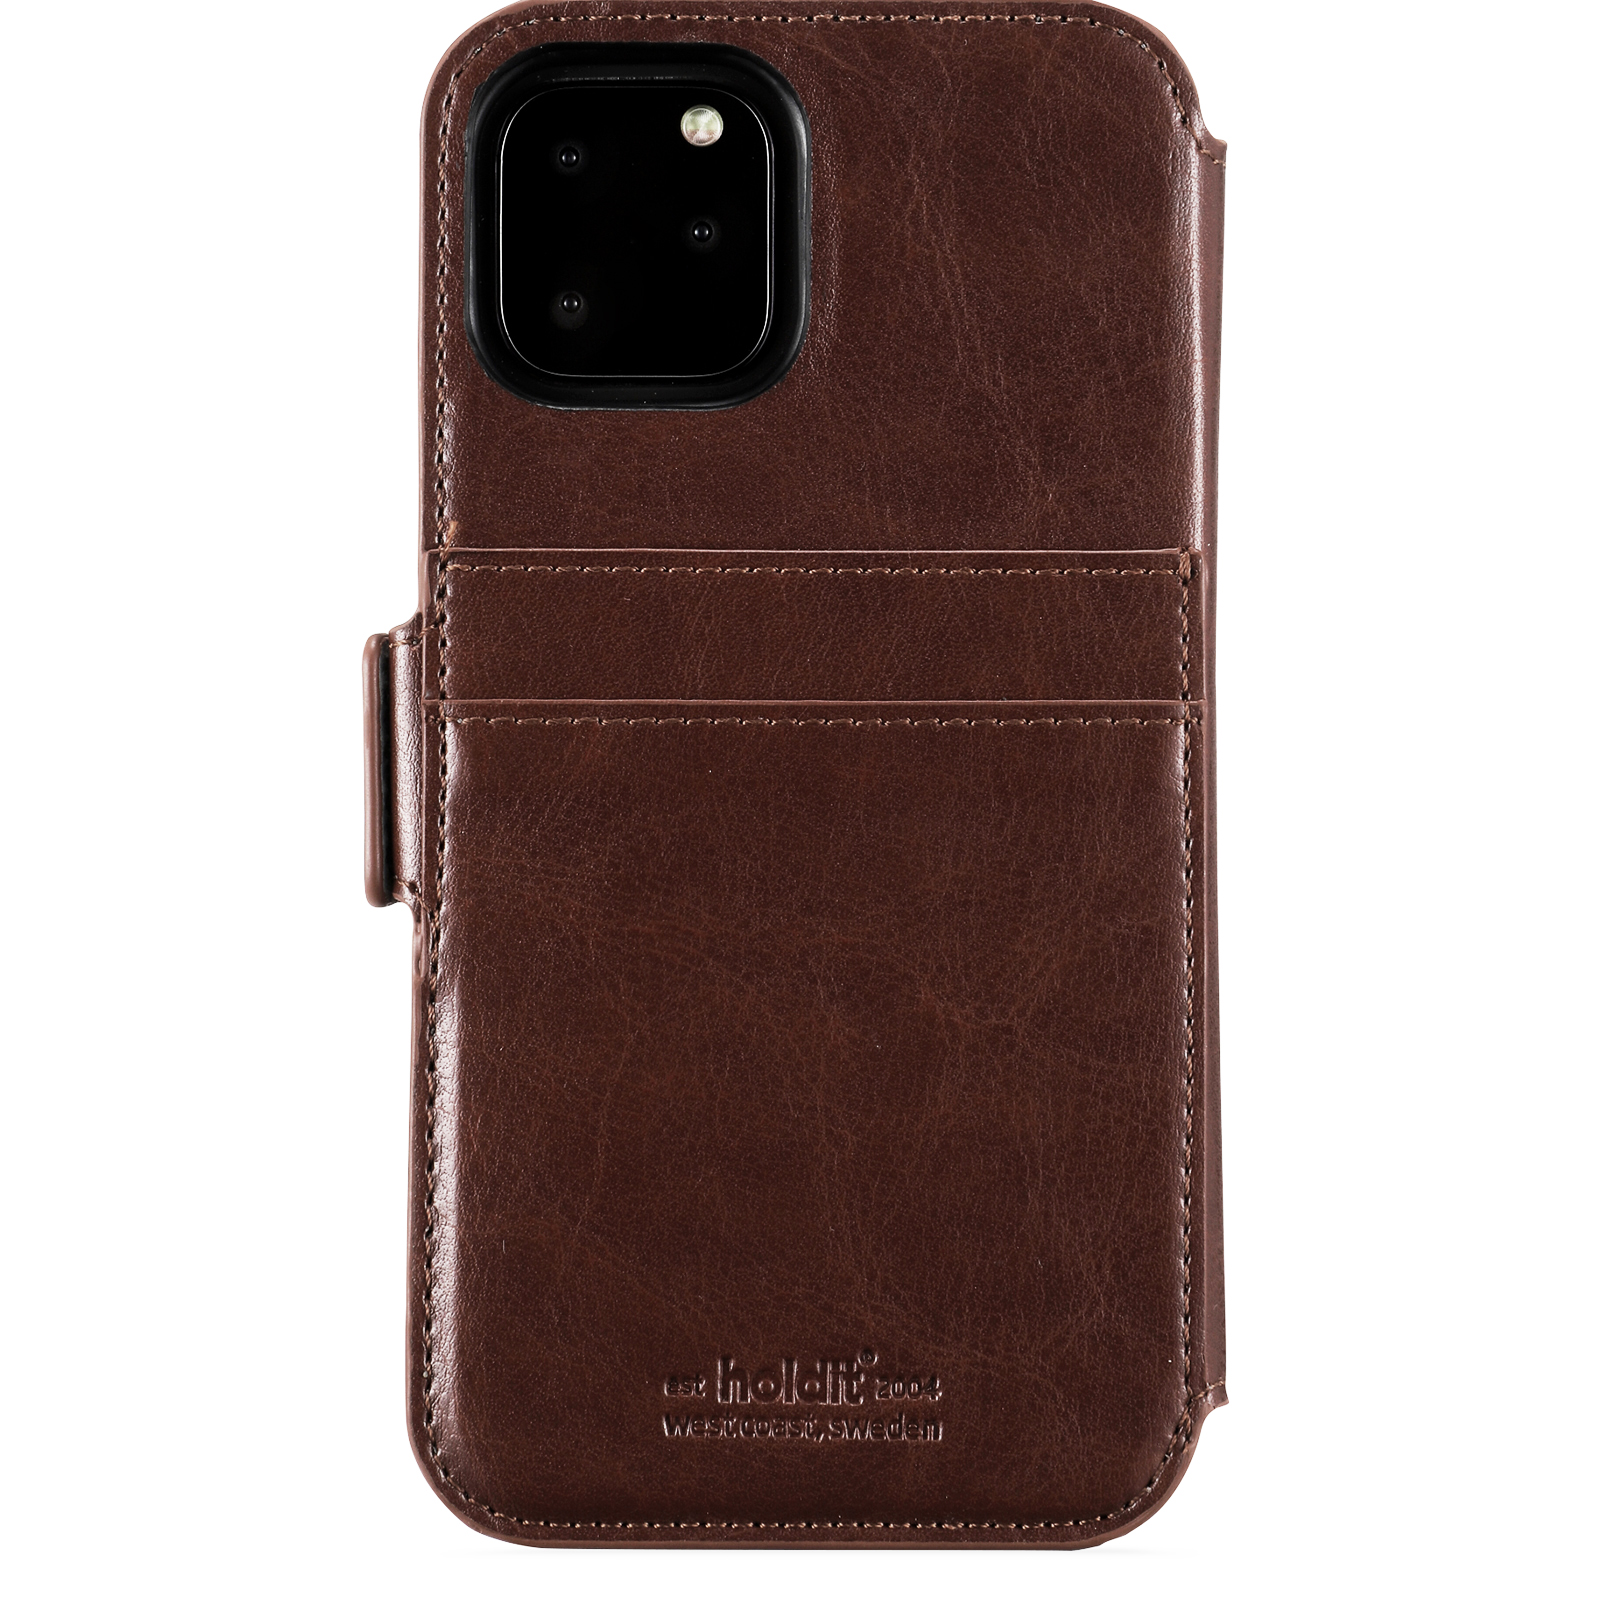 Pro, Braun CASE 14375 Bookcover, Apple, iPhone HOLDIT MAGNET, WALLET 11